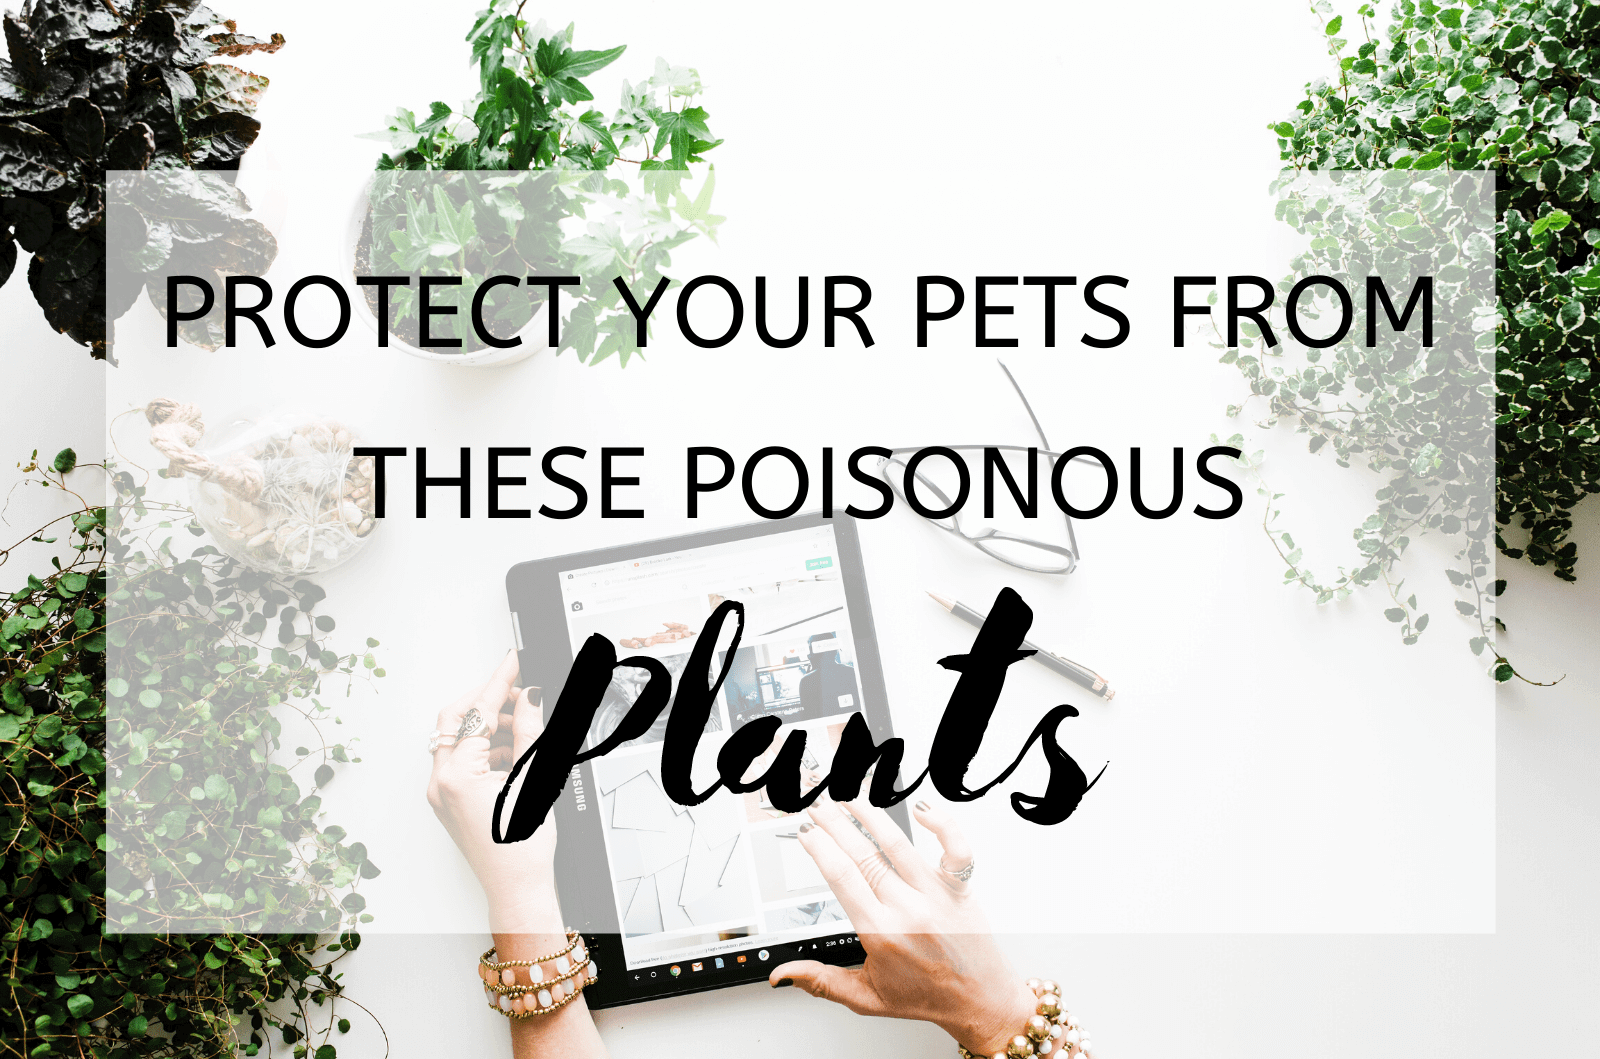 Protect Your Pets From These Poisonous Plants